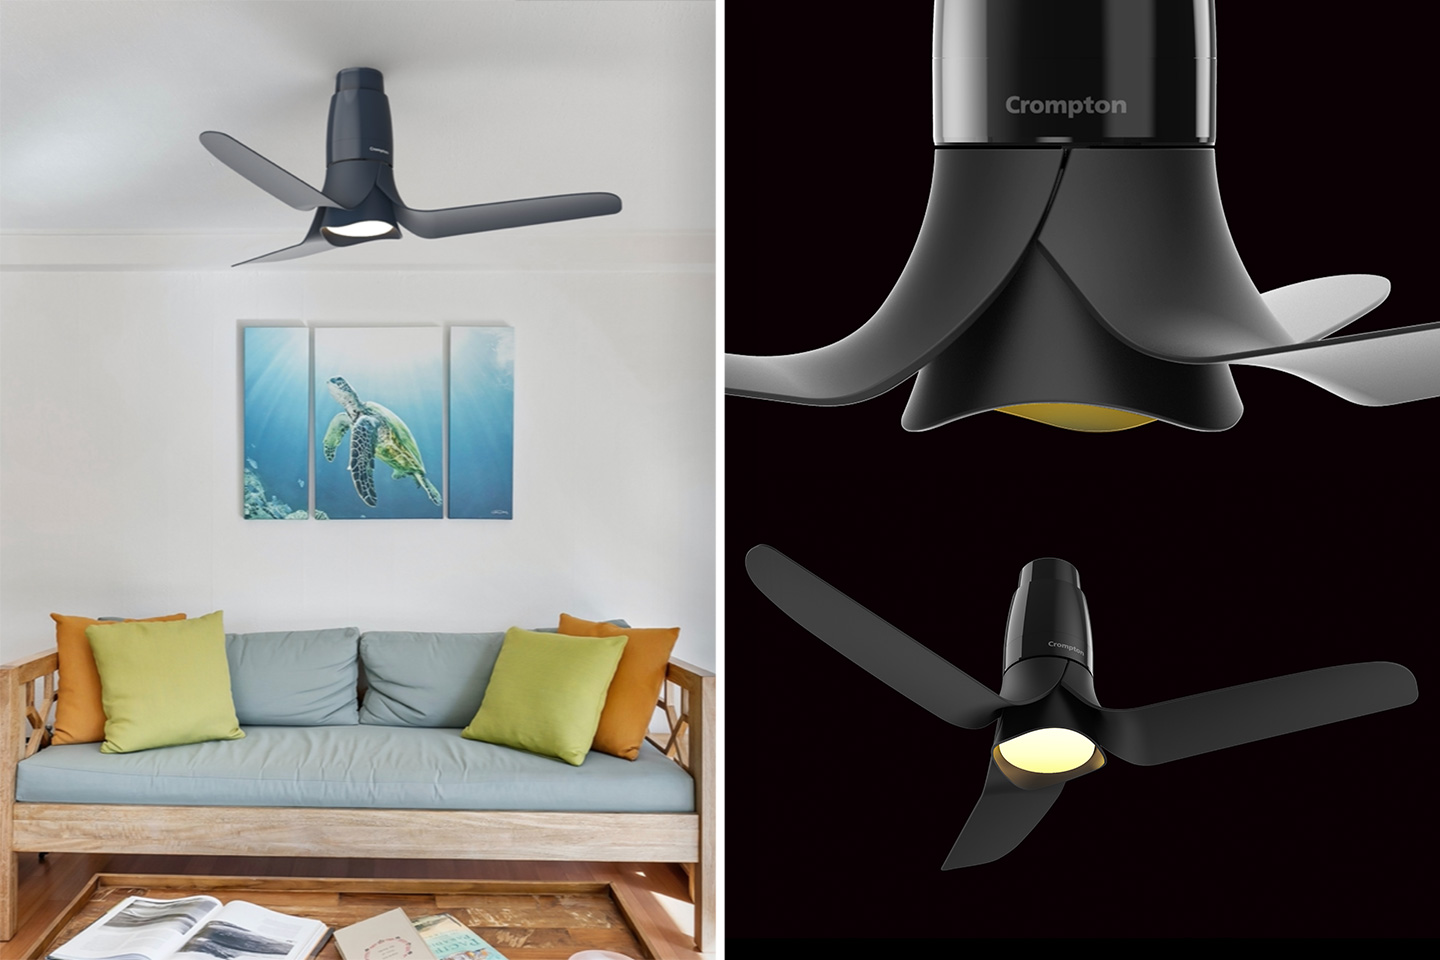 #Meet the Blossom, an award-winning ceiling fan with a minimalist flower-inspired aesthetic